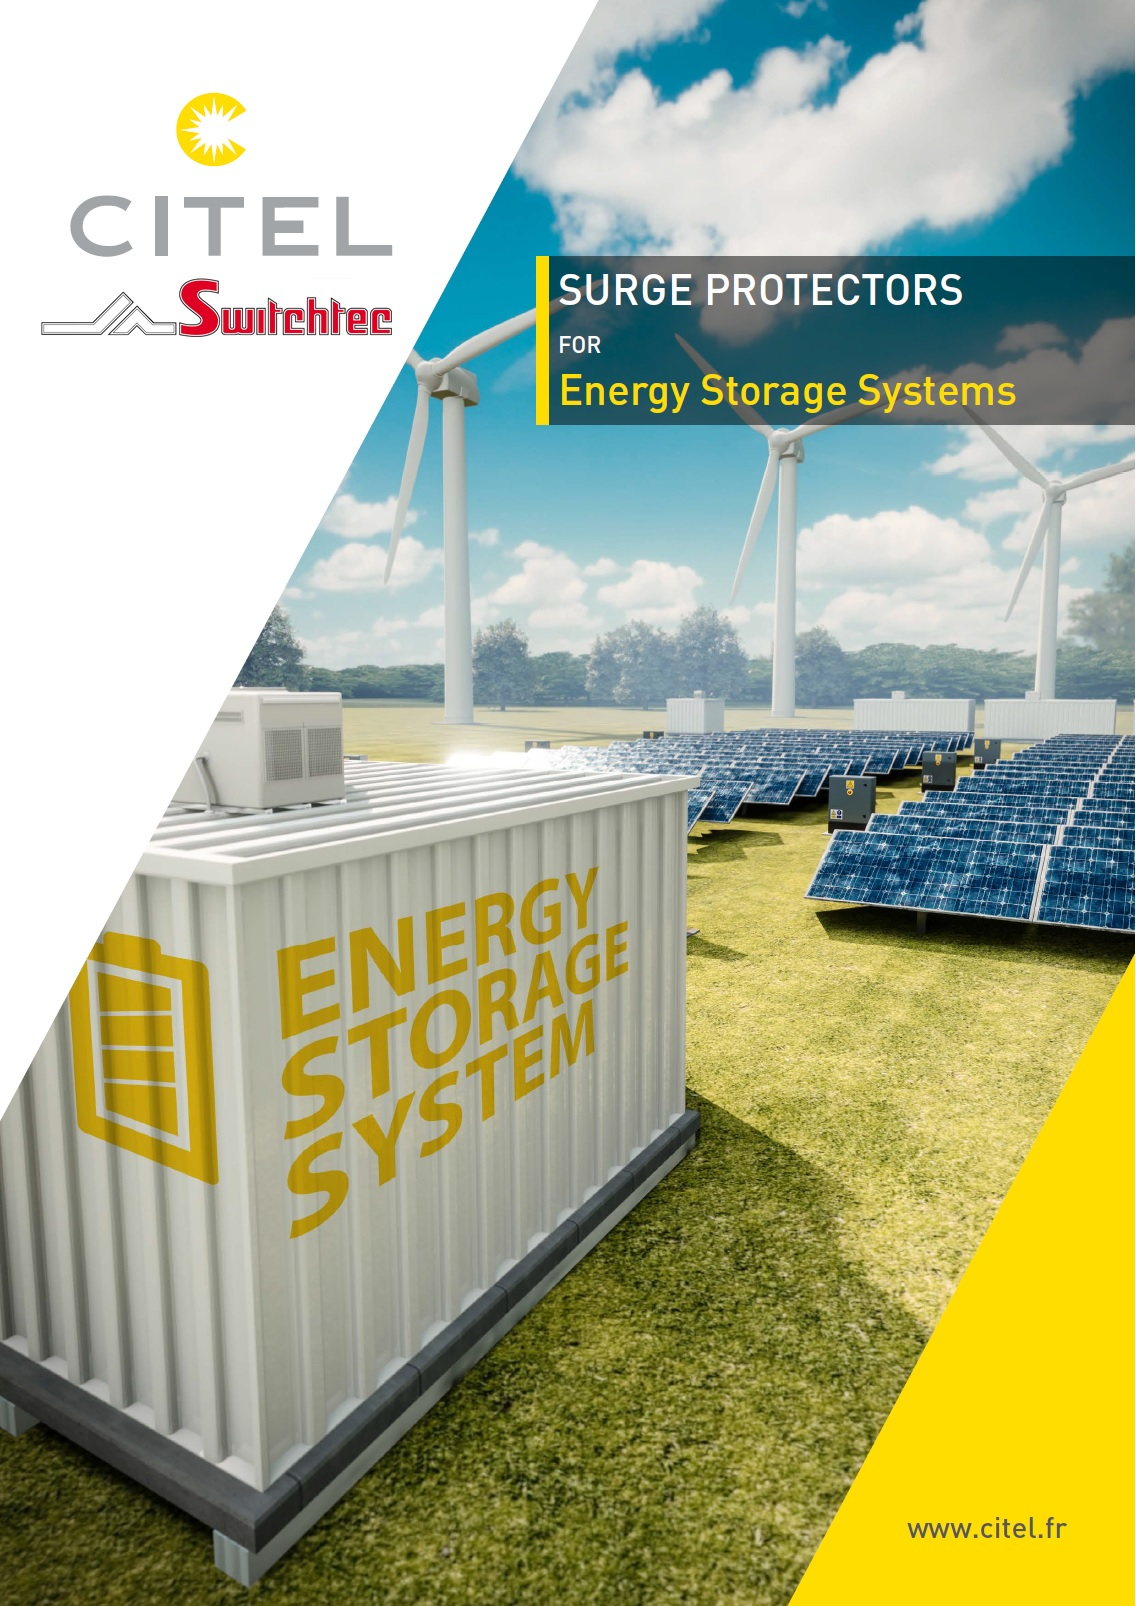 Surge Protectors for Energy Storage Systems